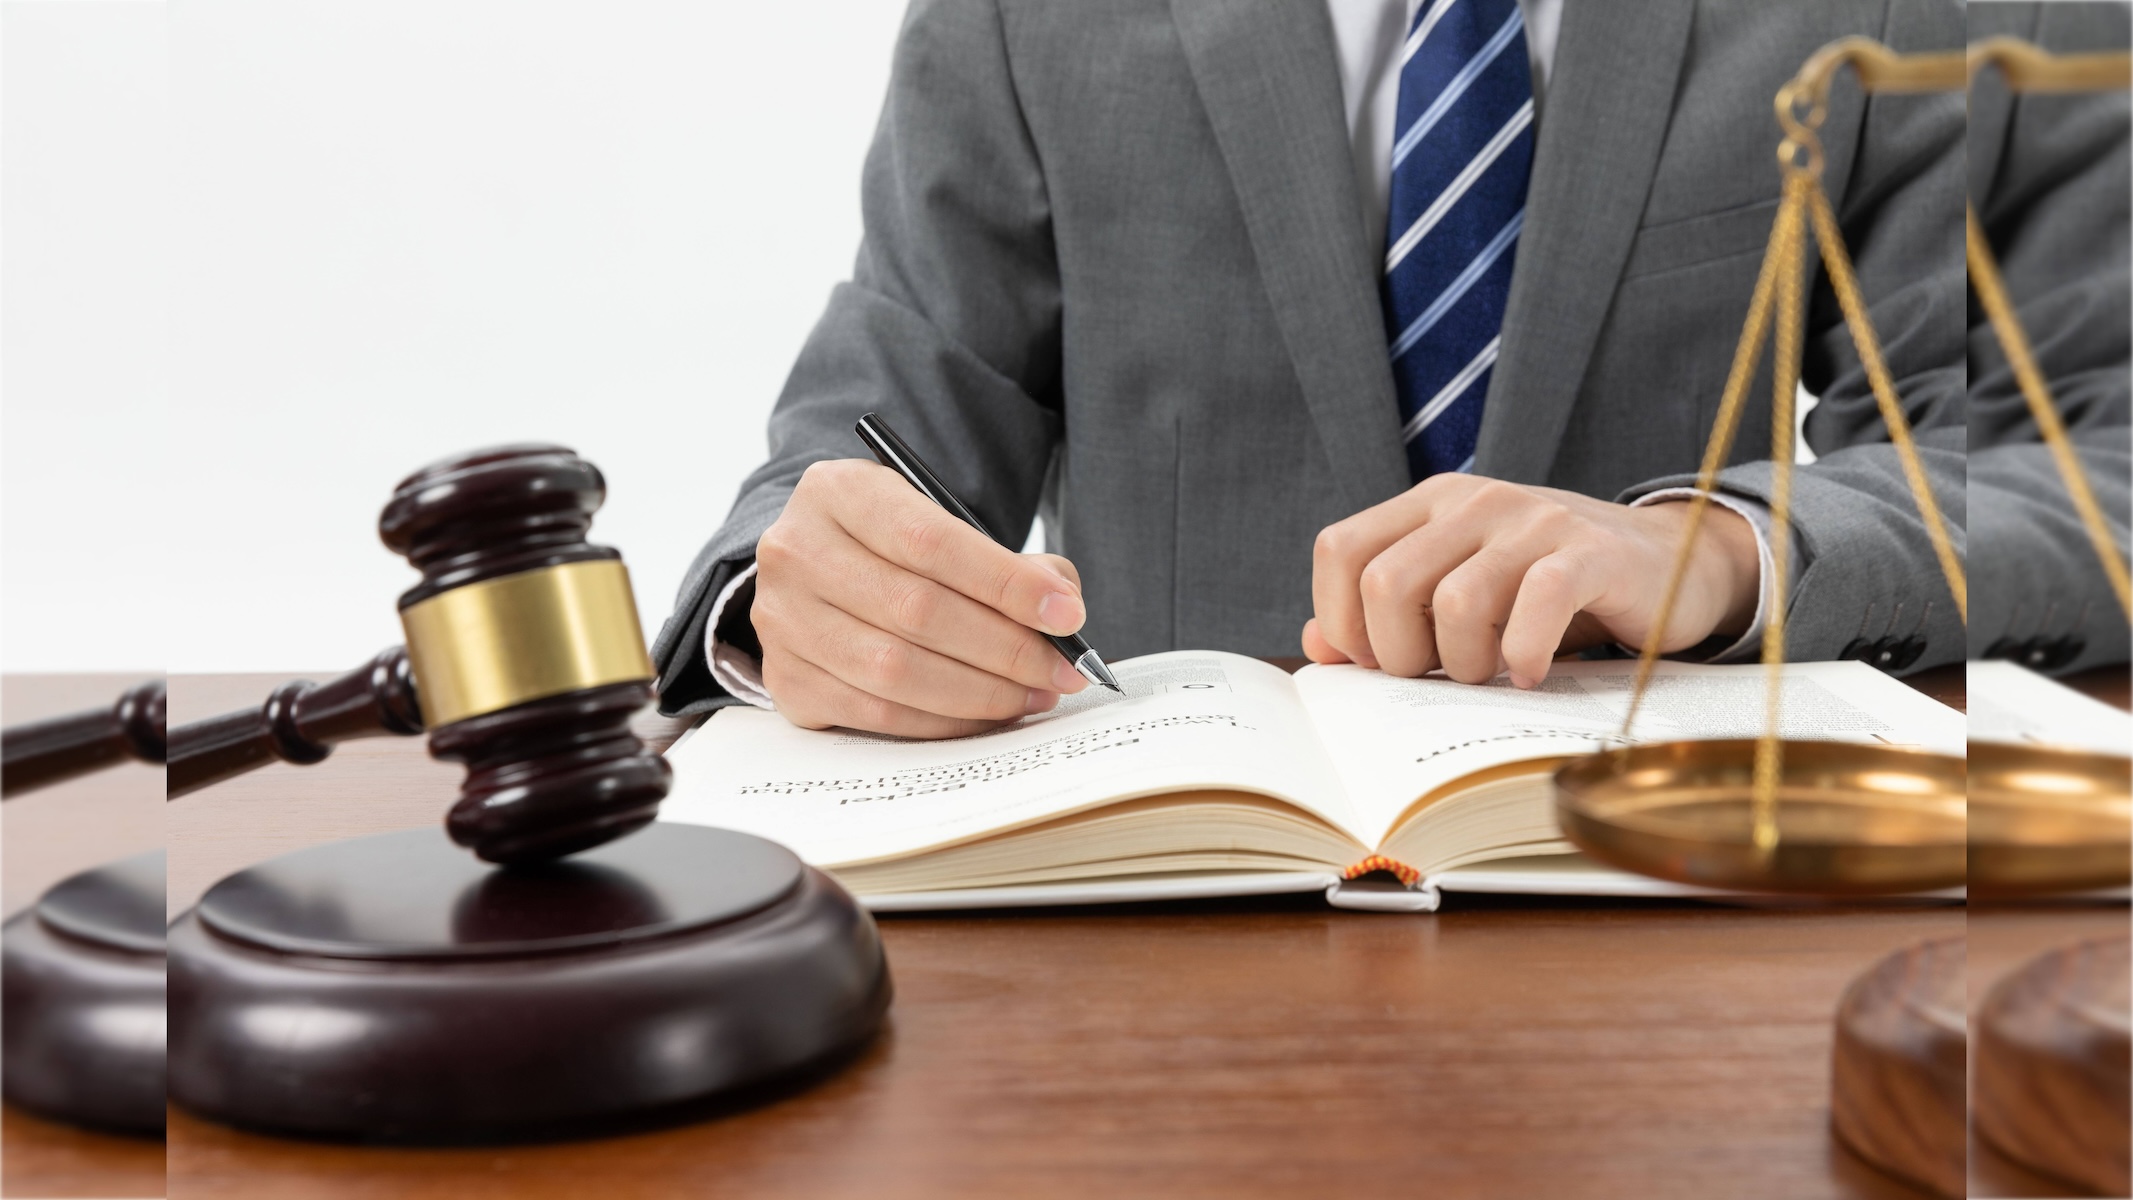 closeup-shot-person-writing-book-with-gavel-table_2_16x9